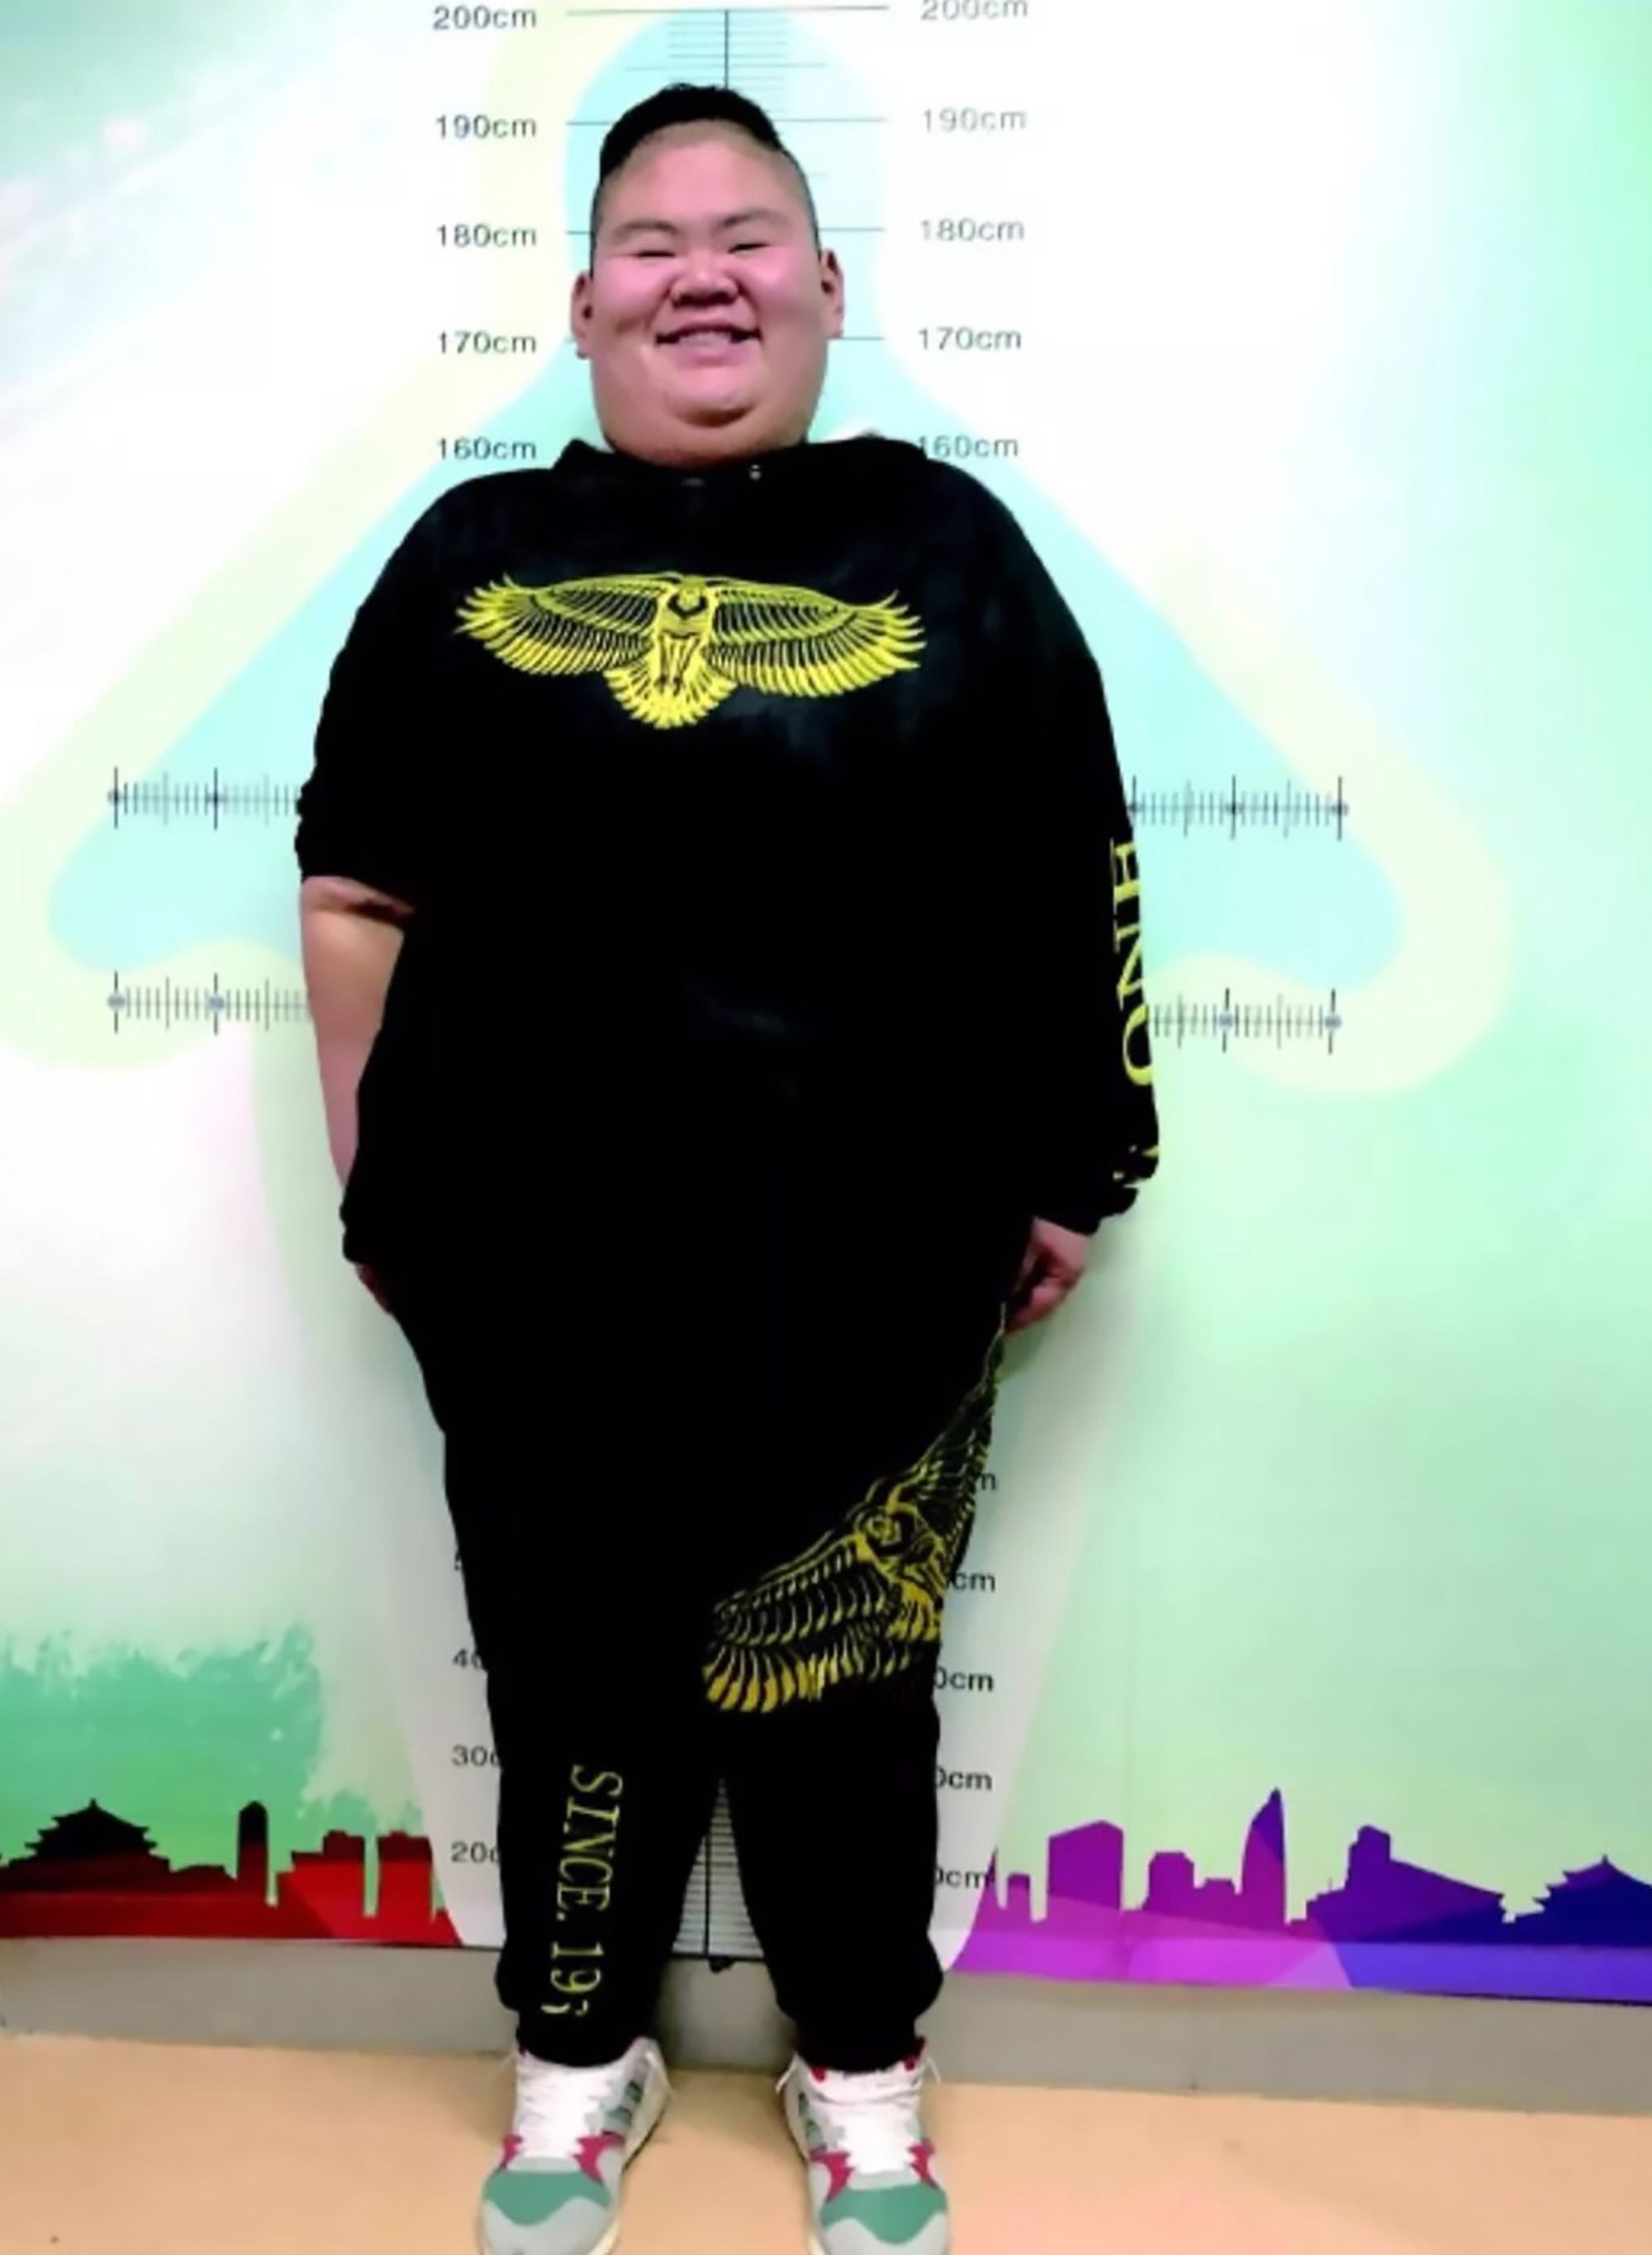 Chinas Fattest Man Loses 22 Stone In 6 Months - ViralTab